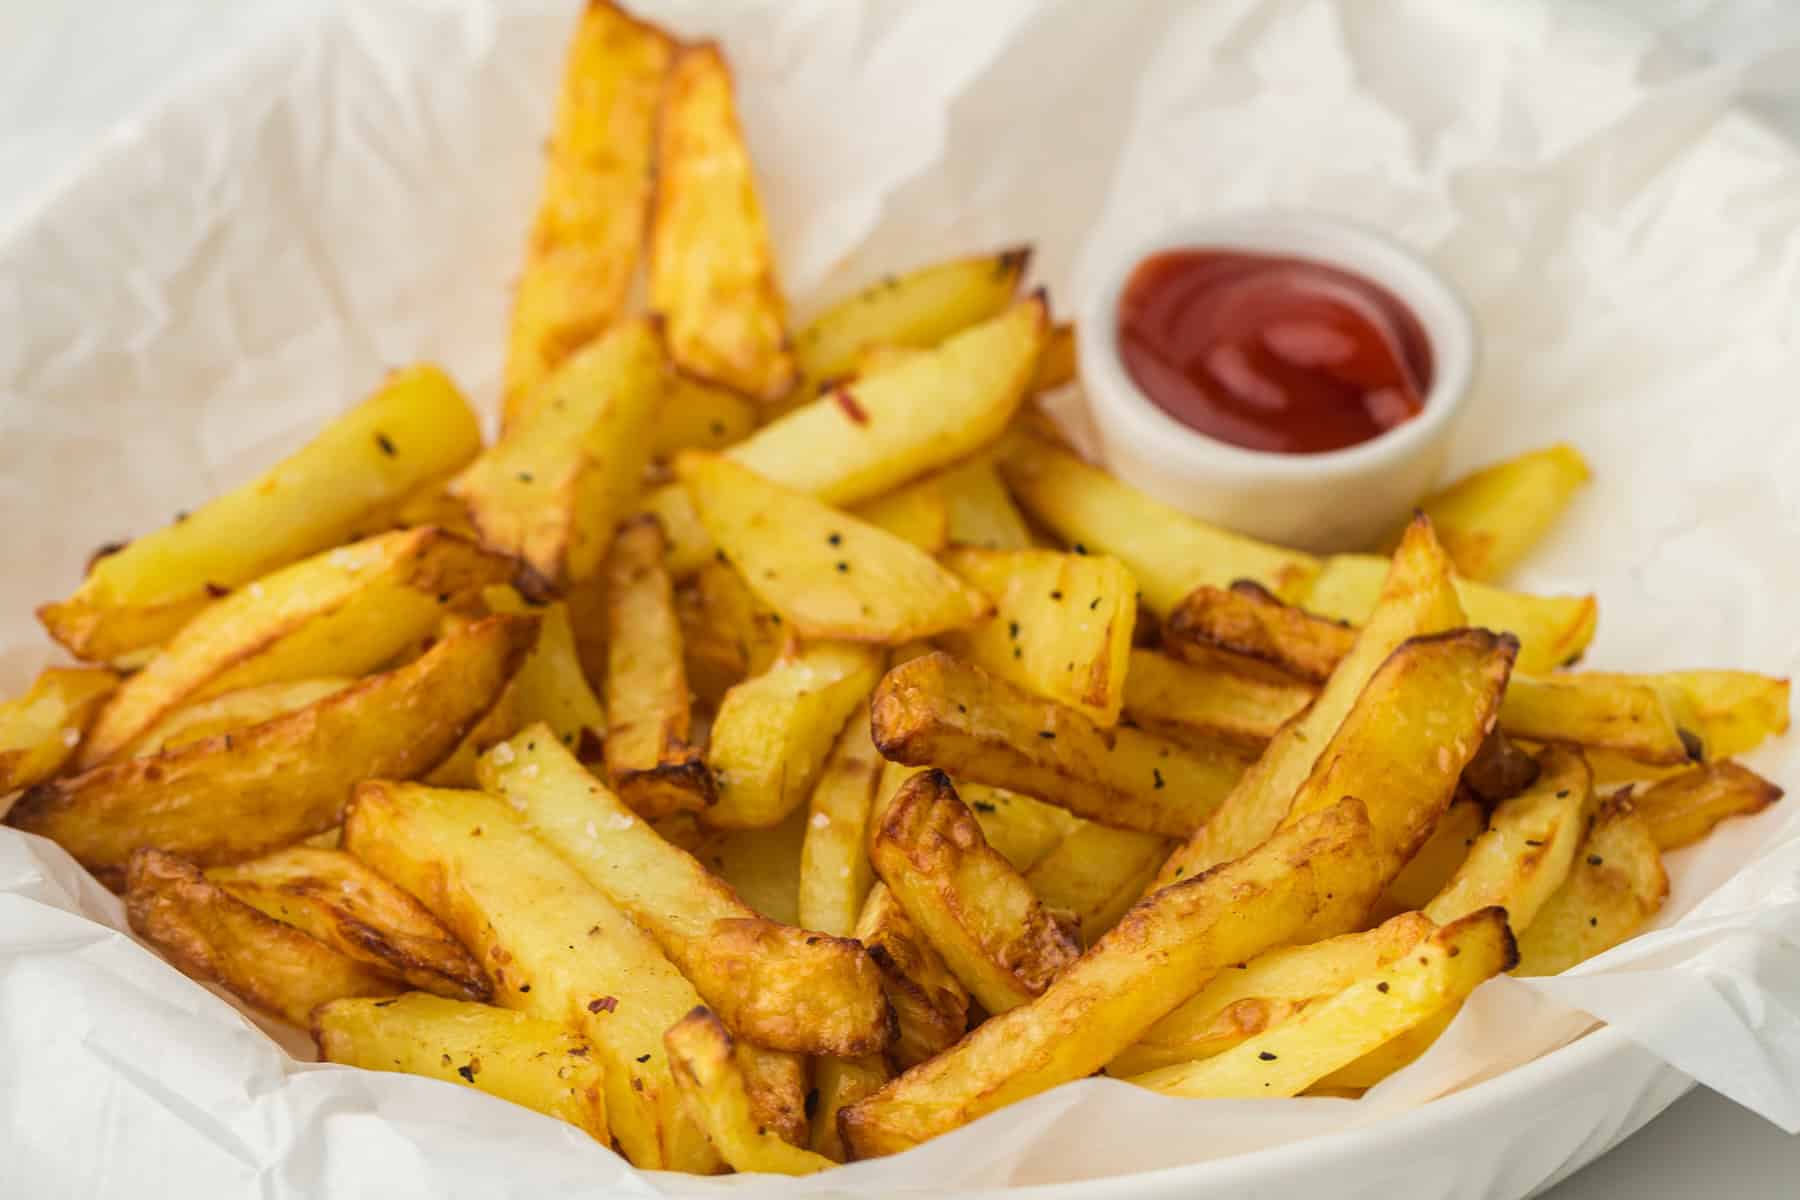 A basket of golden, crispy potato fries seasoned with pepper, accompanied by a small cup of ketchup on the side, presented on white parchment paper.